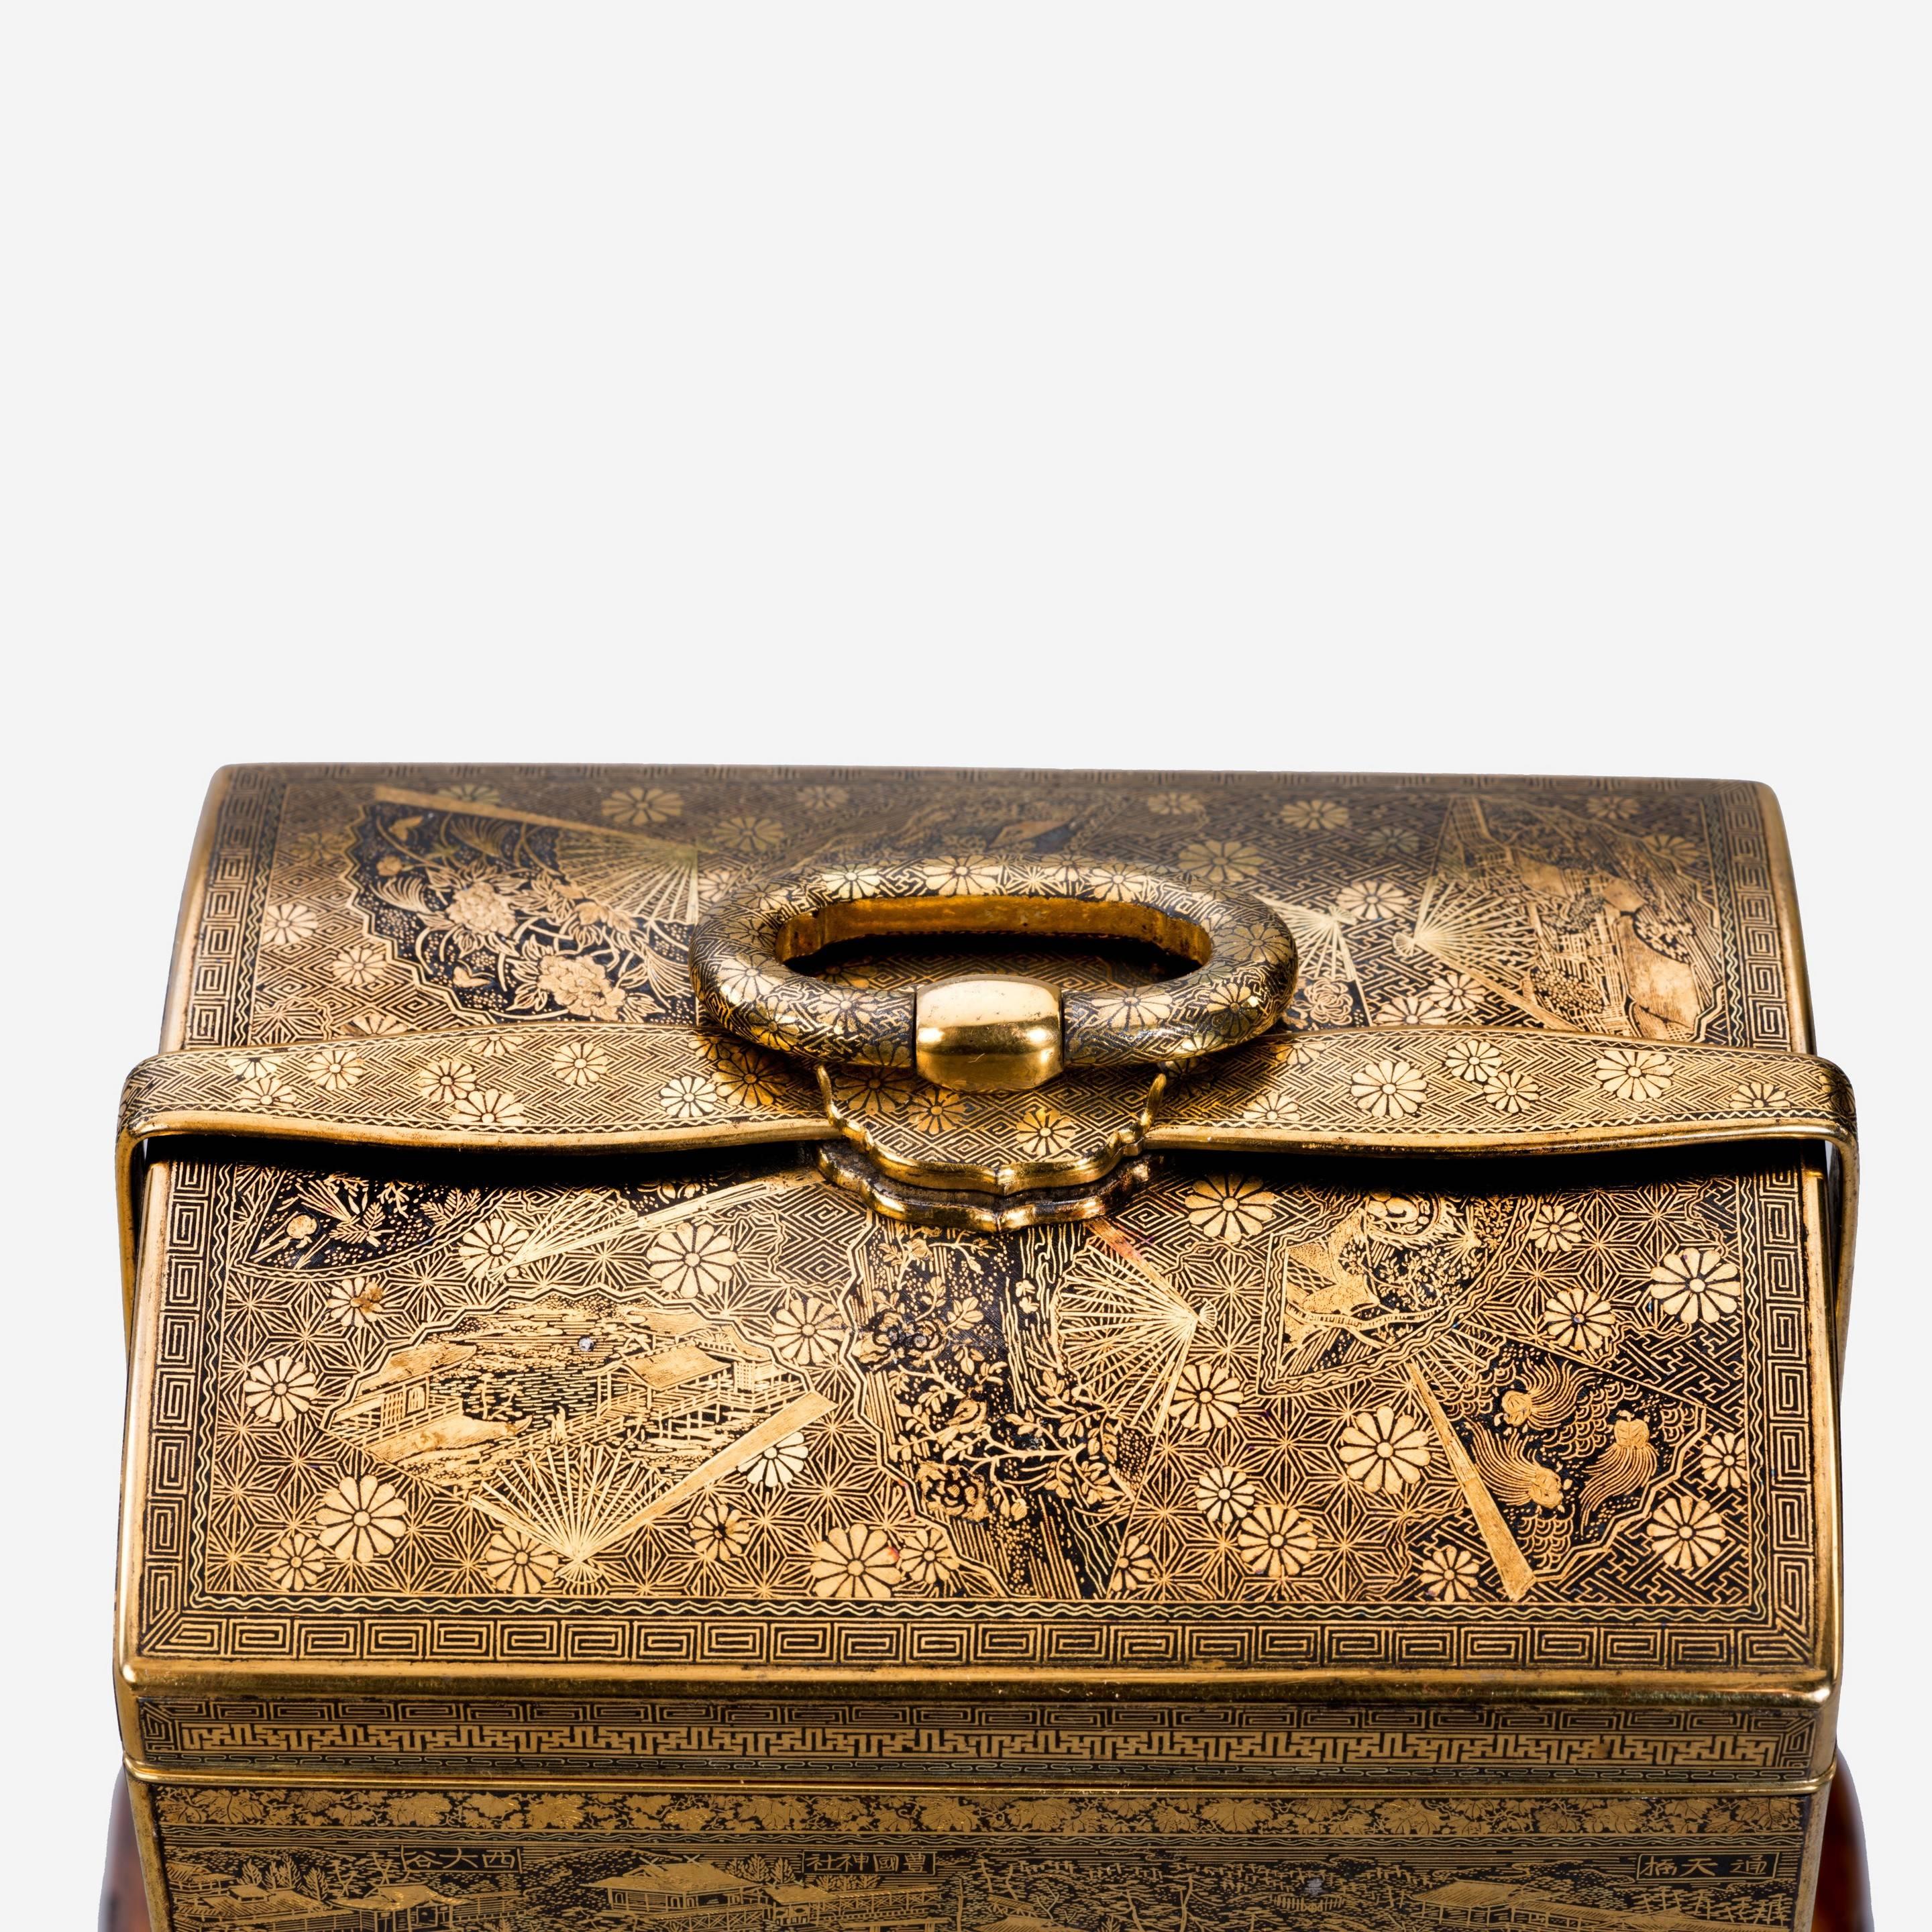 Japanese A superb and rare gold inlaid iron jubako (lunch box) by Komai of Kyoto